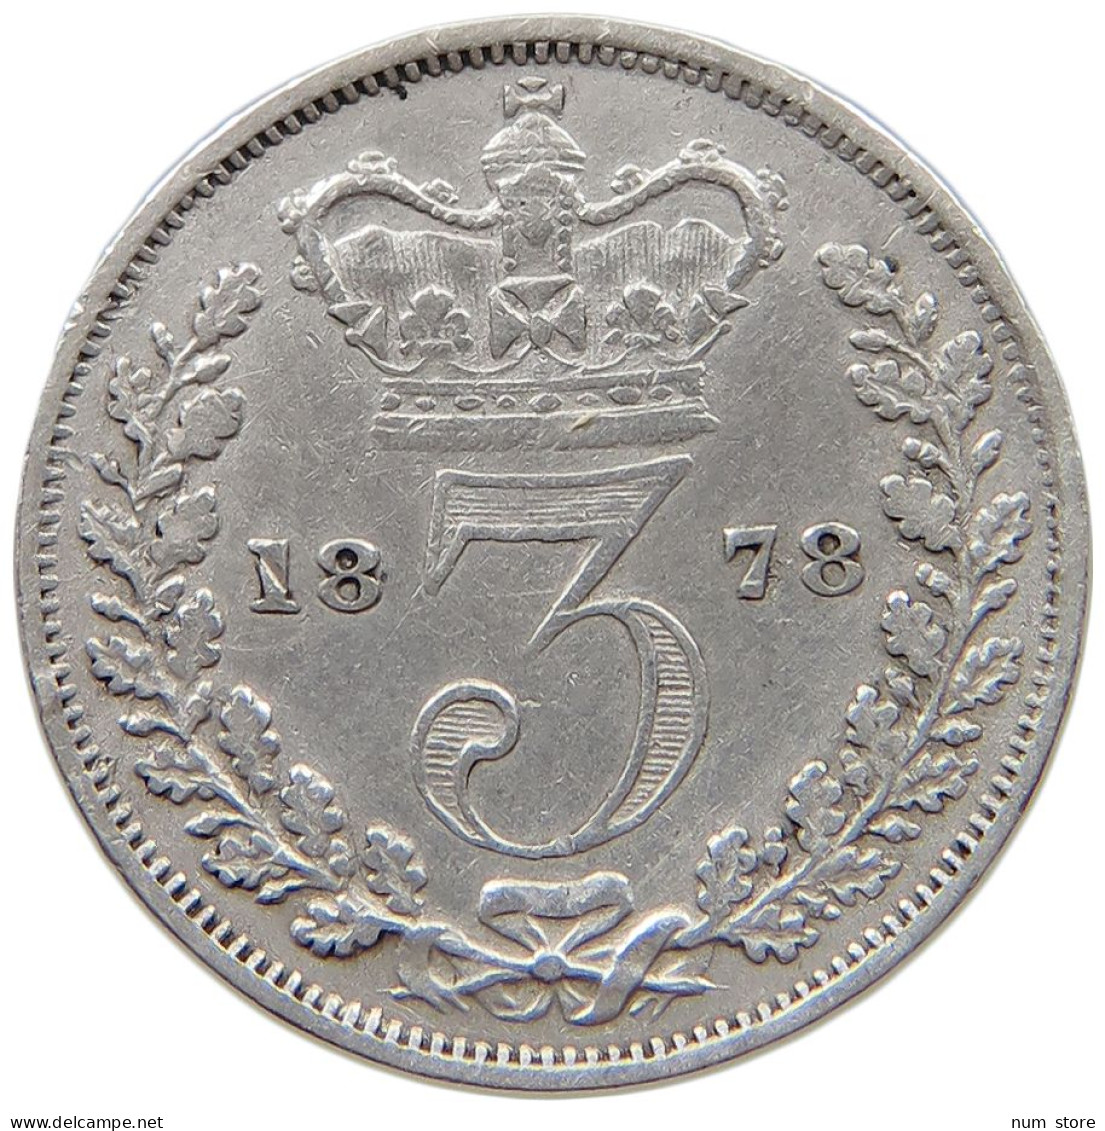 GREAT BRITAIN THREEPENCE 1878 Victoria 1837-1901 #t148 0855 - F. 3 Pence